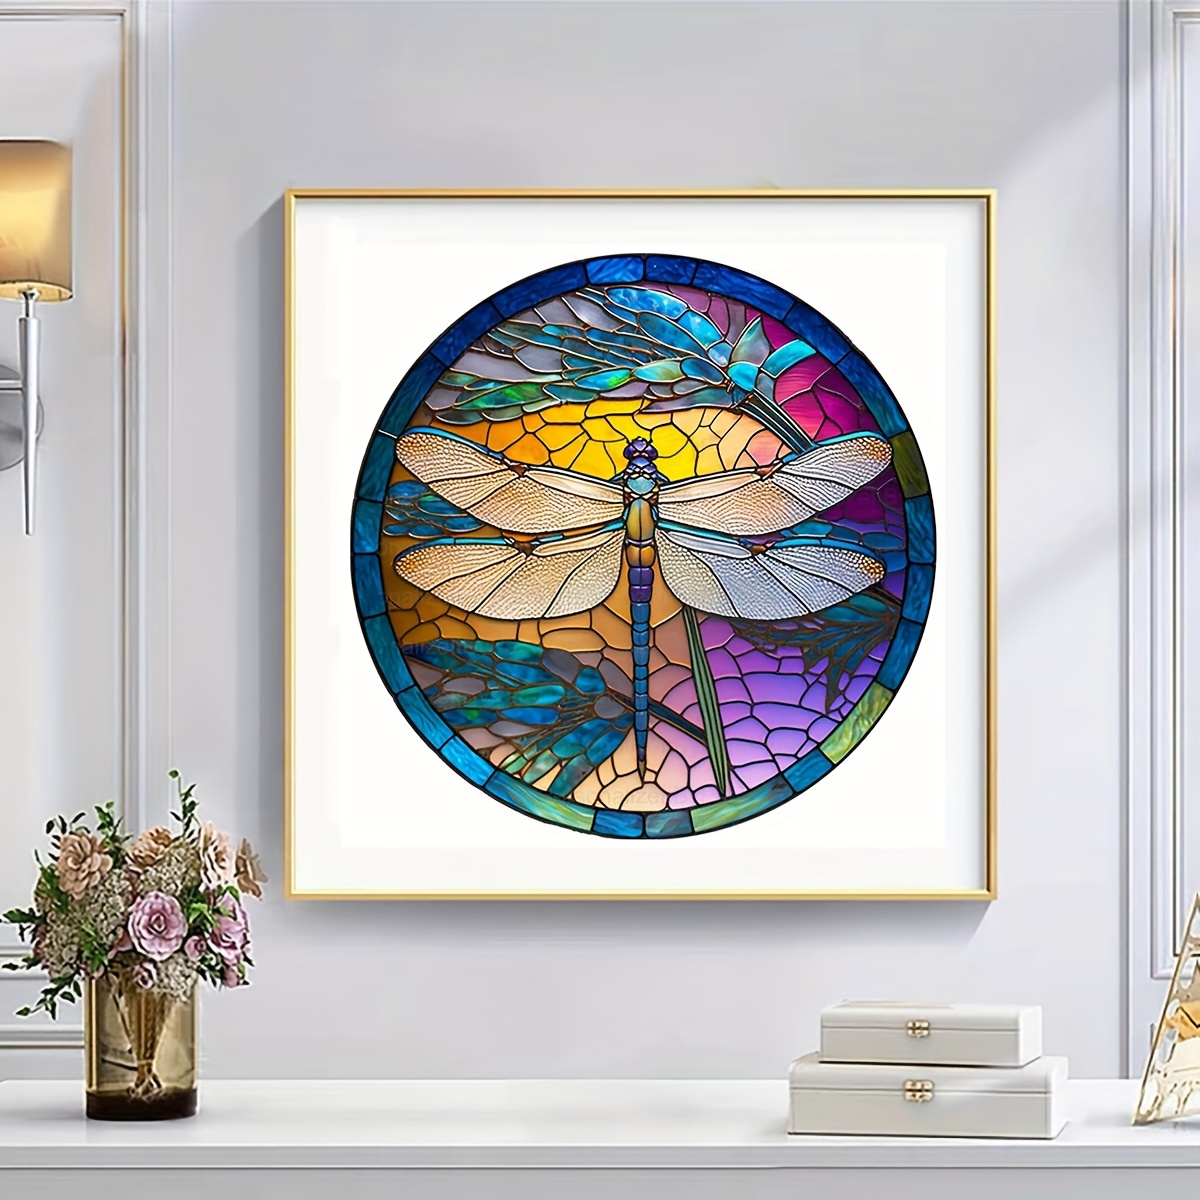 5D DIY Diamond Painting For Adults And Beginners Dragon Diamond Painting  For Living Room Bedroom Decoration 30*30cm/11.8inx11.8inch